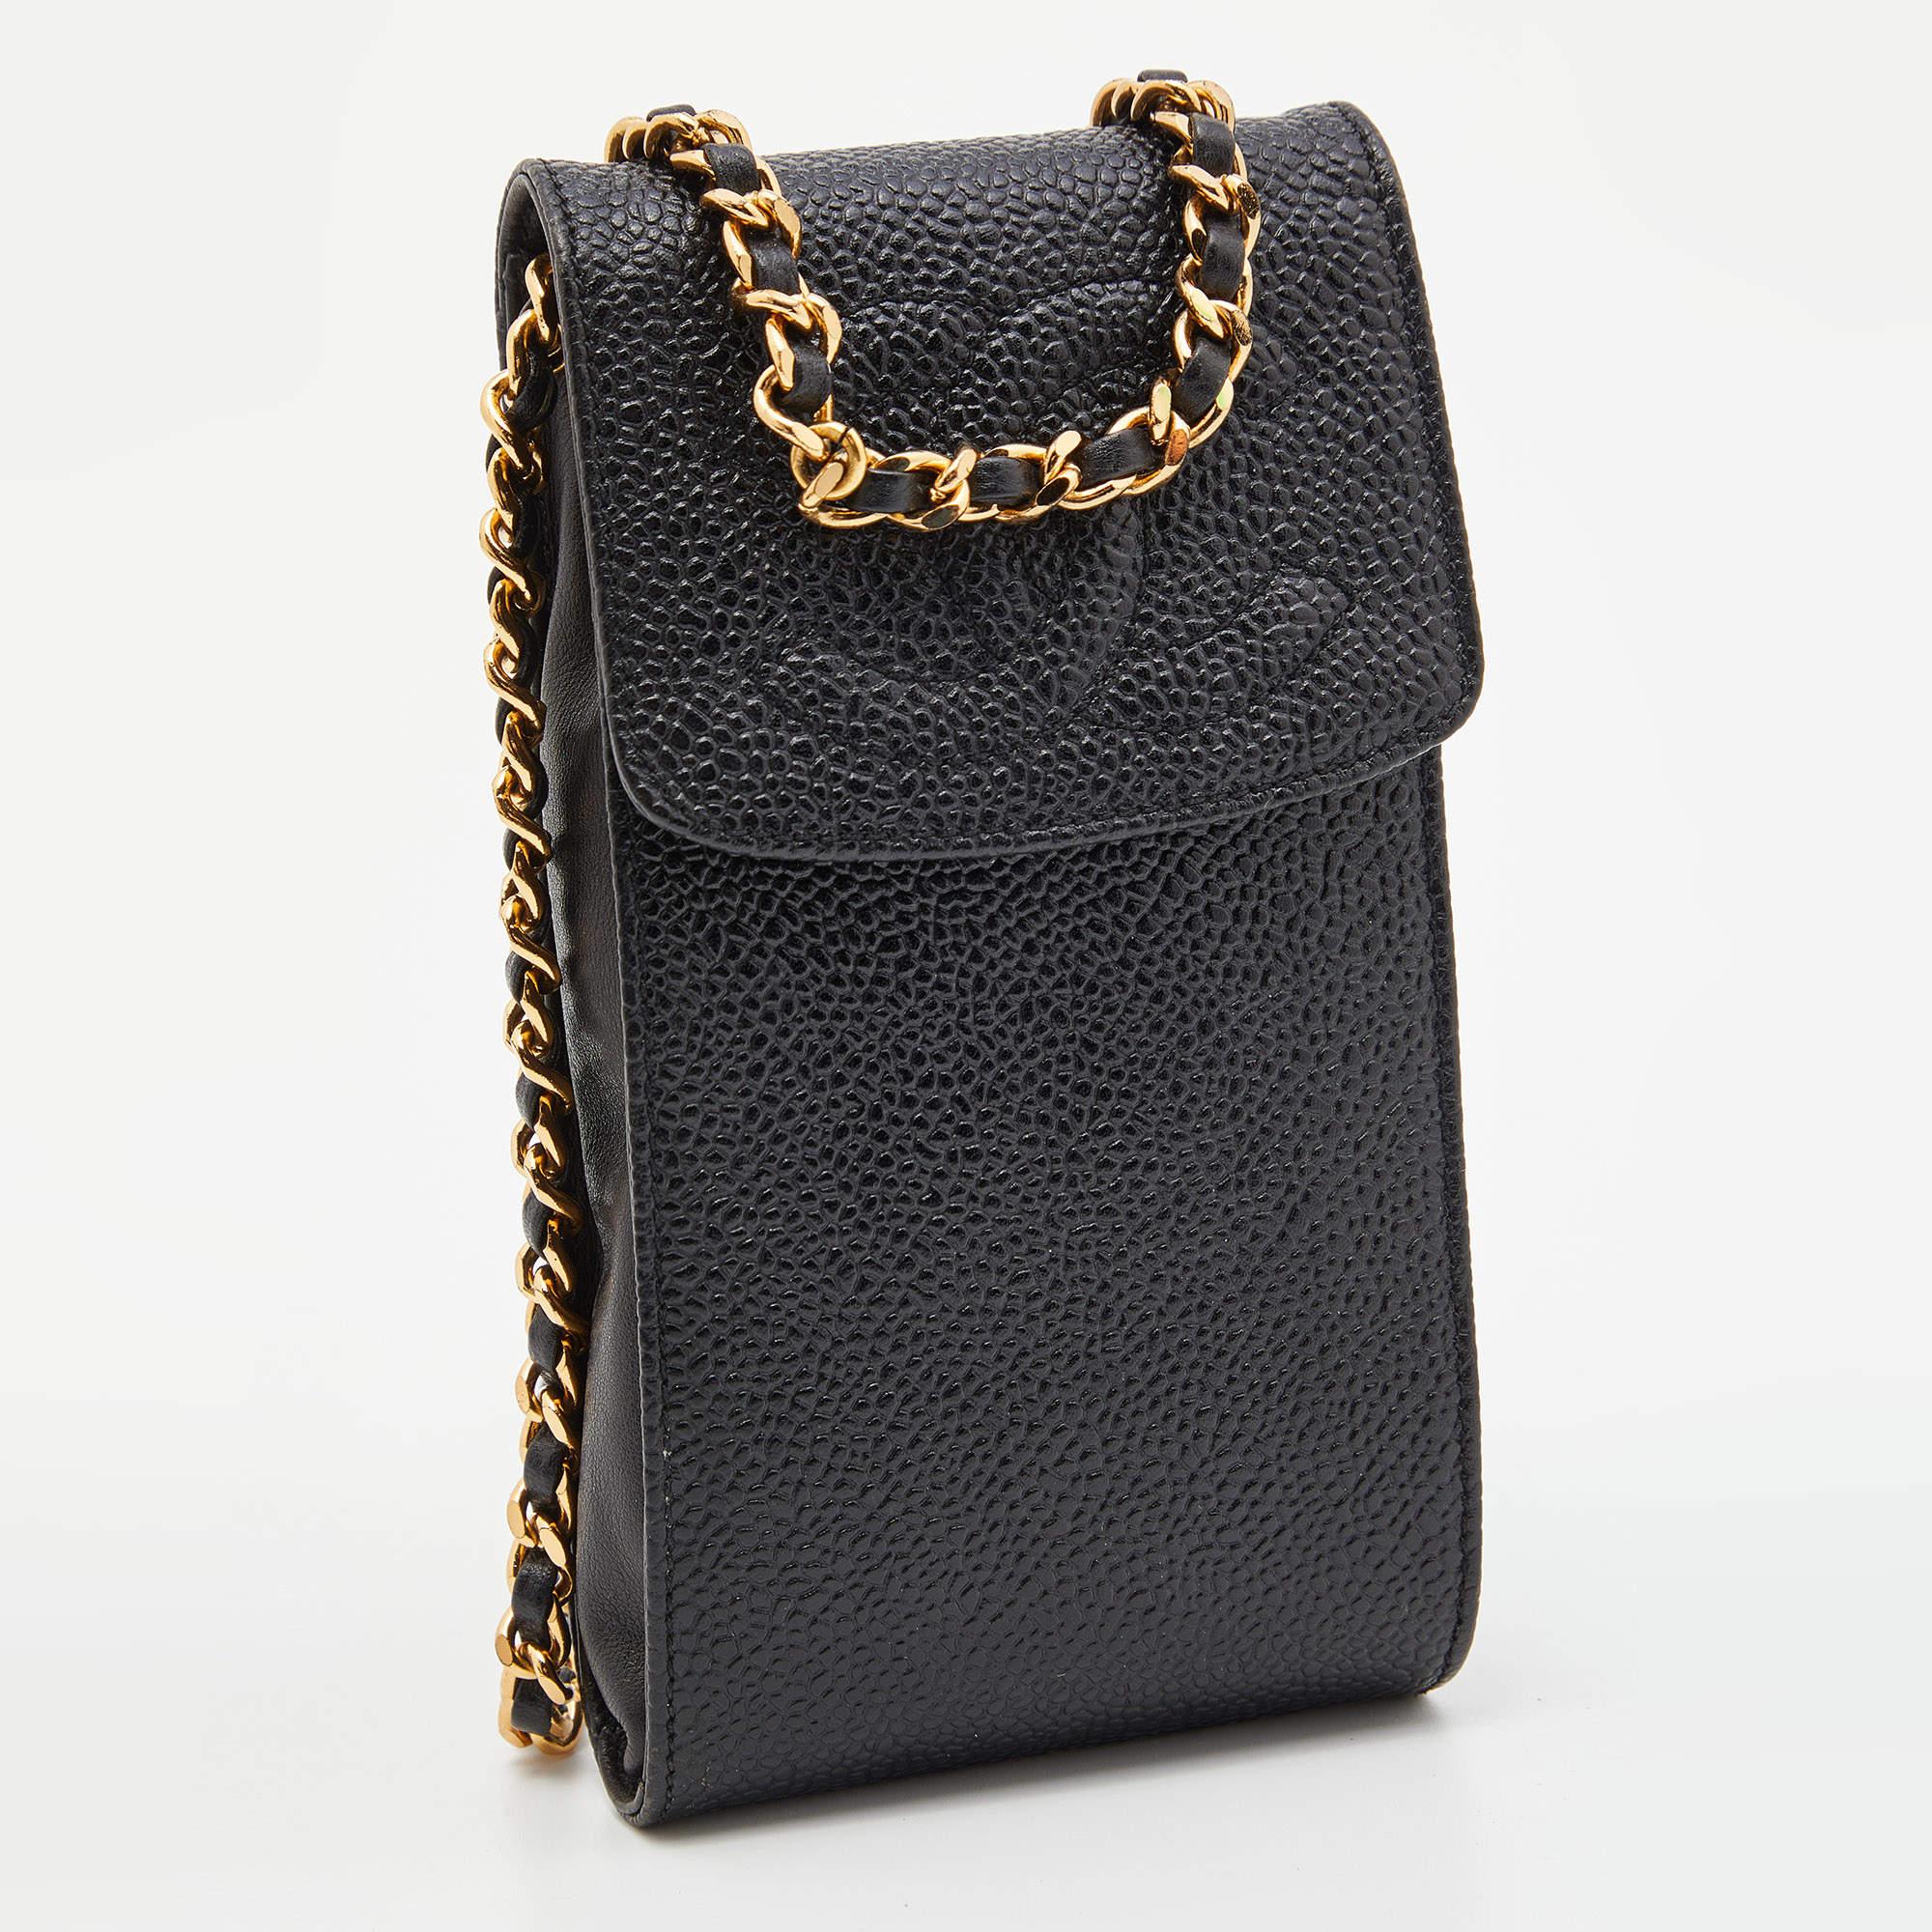 Carrying your phone will not be a hassle anymore, thanks to this super-cute phone case from Chanel. Its Caviar quilted leather exterior is complemented with a CC accent on the flap and the signature chain strap.

Includes: Original Dustbag